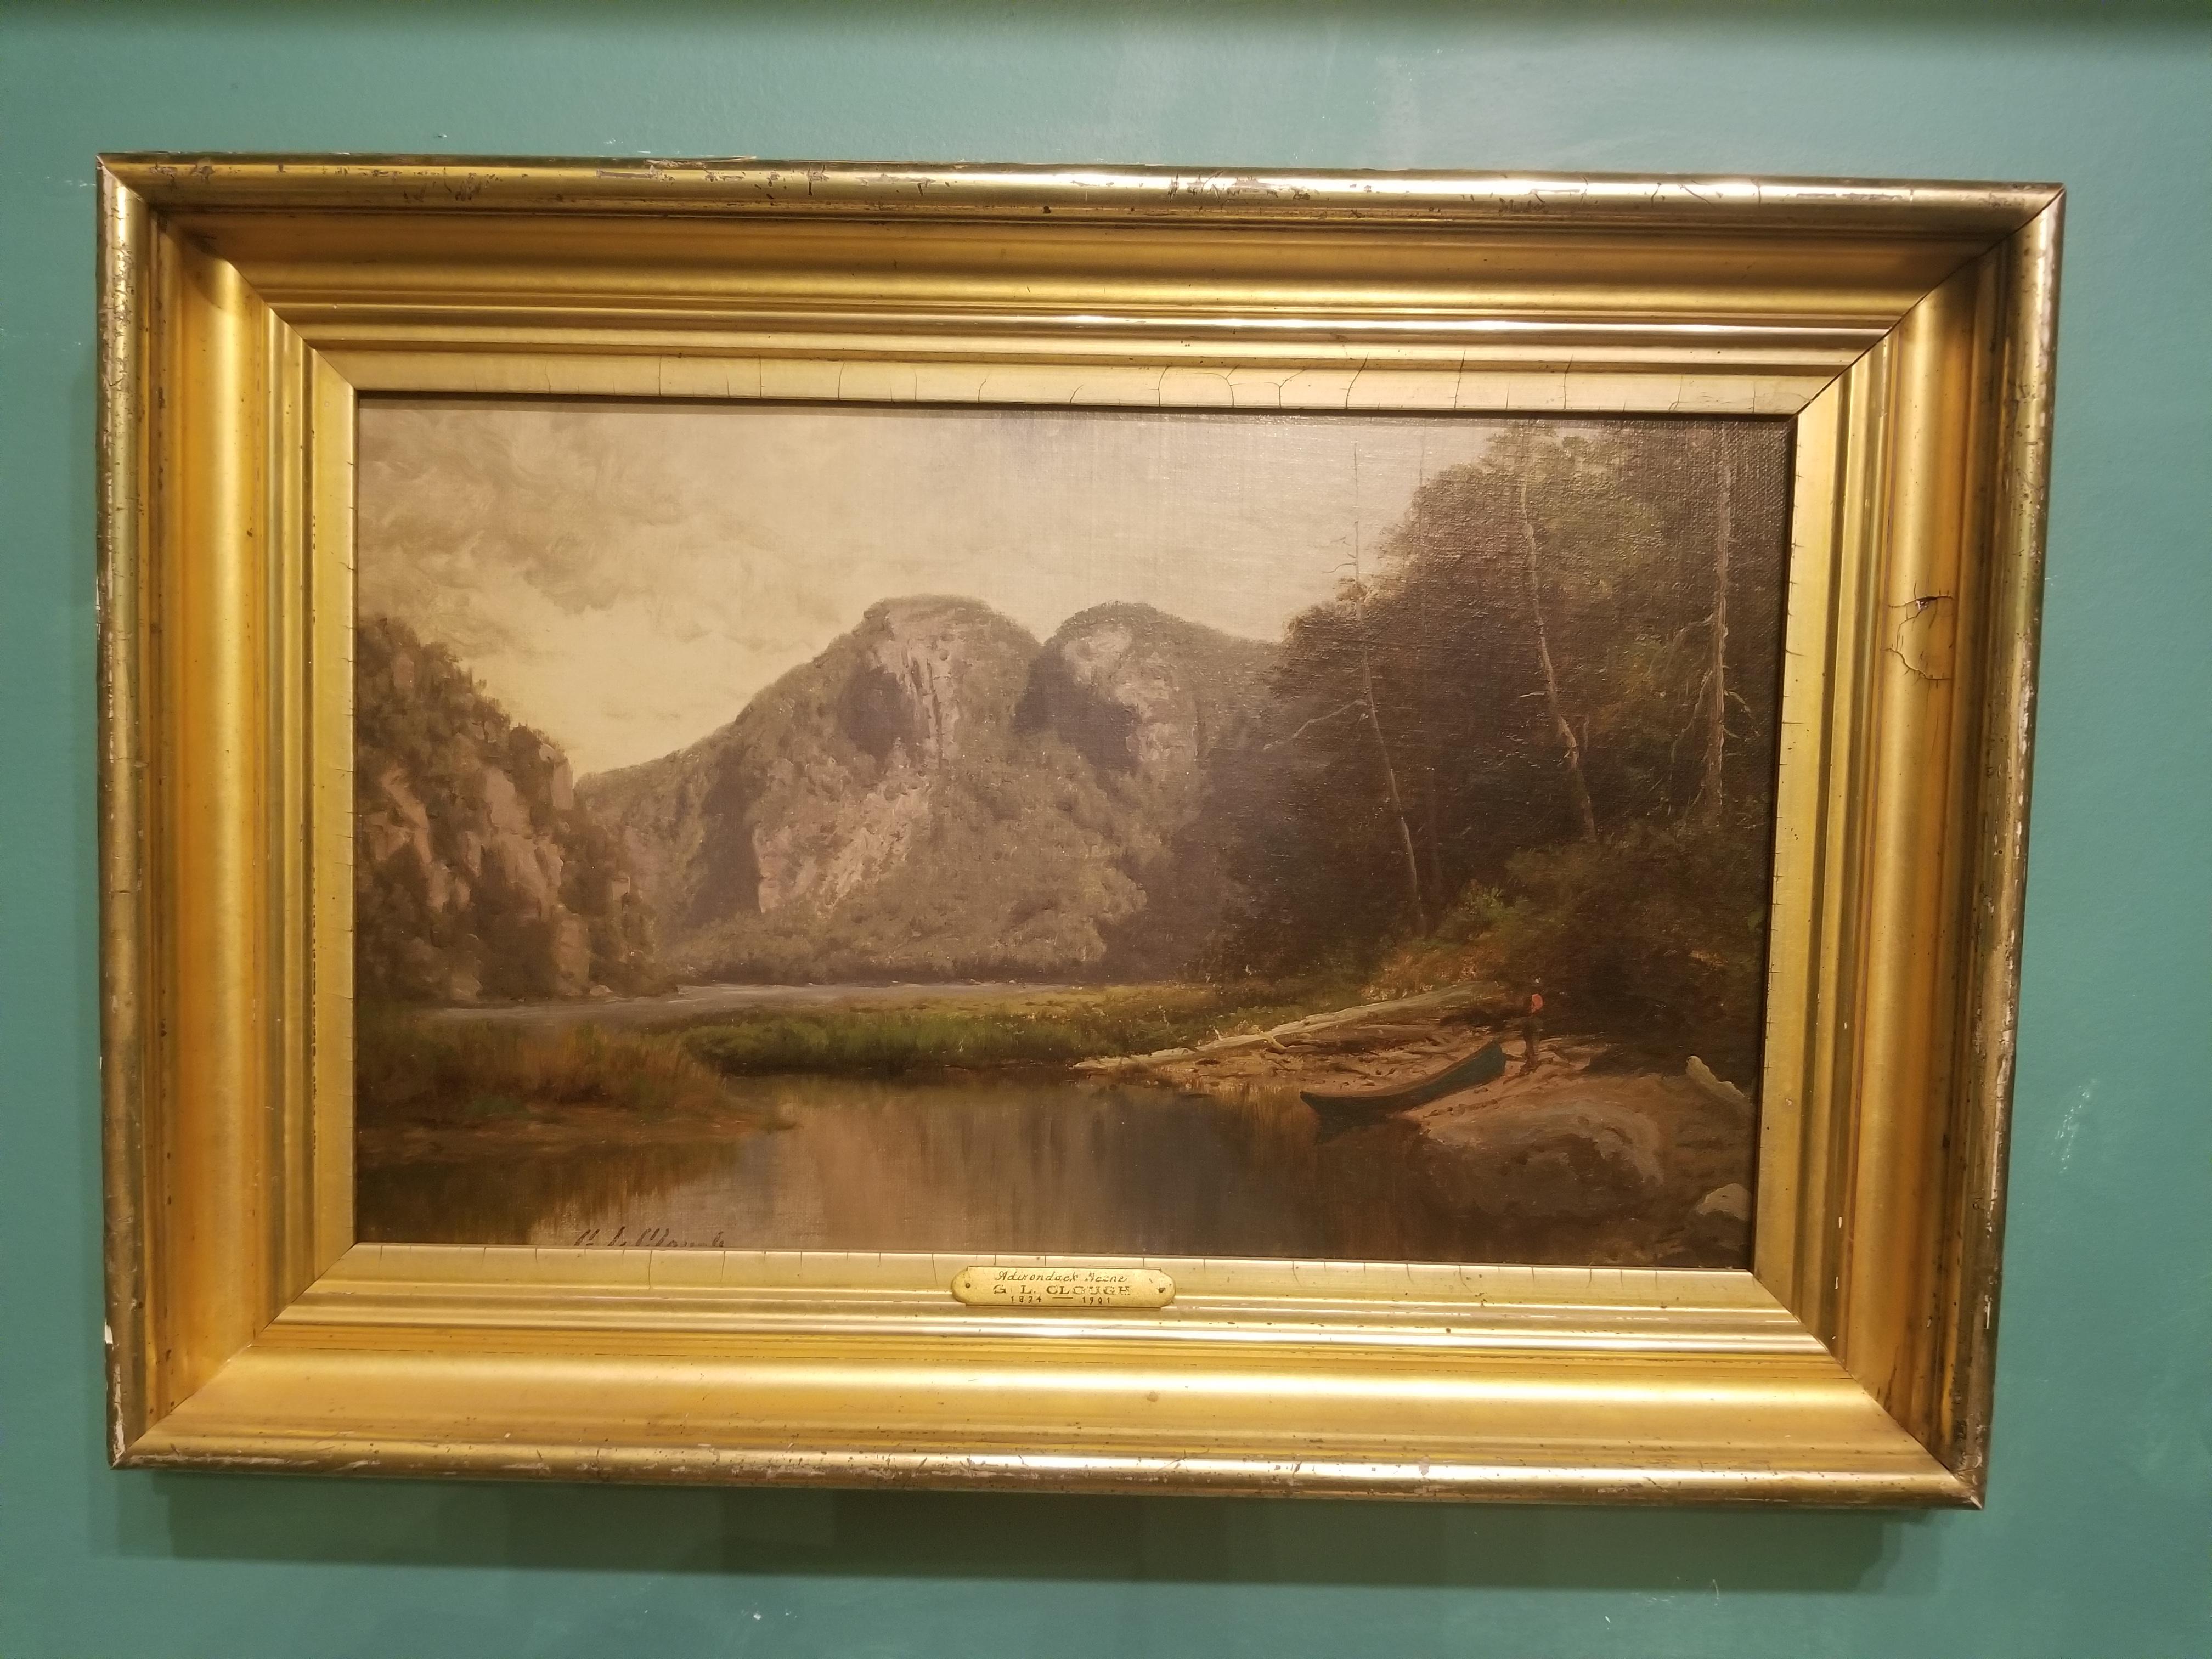 Indian Head, Ausable Head, Adirondacks  - Painting by George Clough